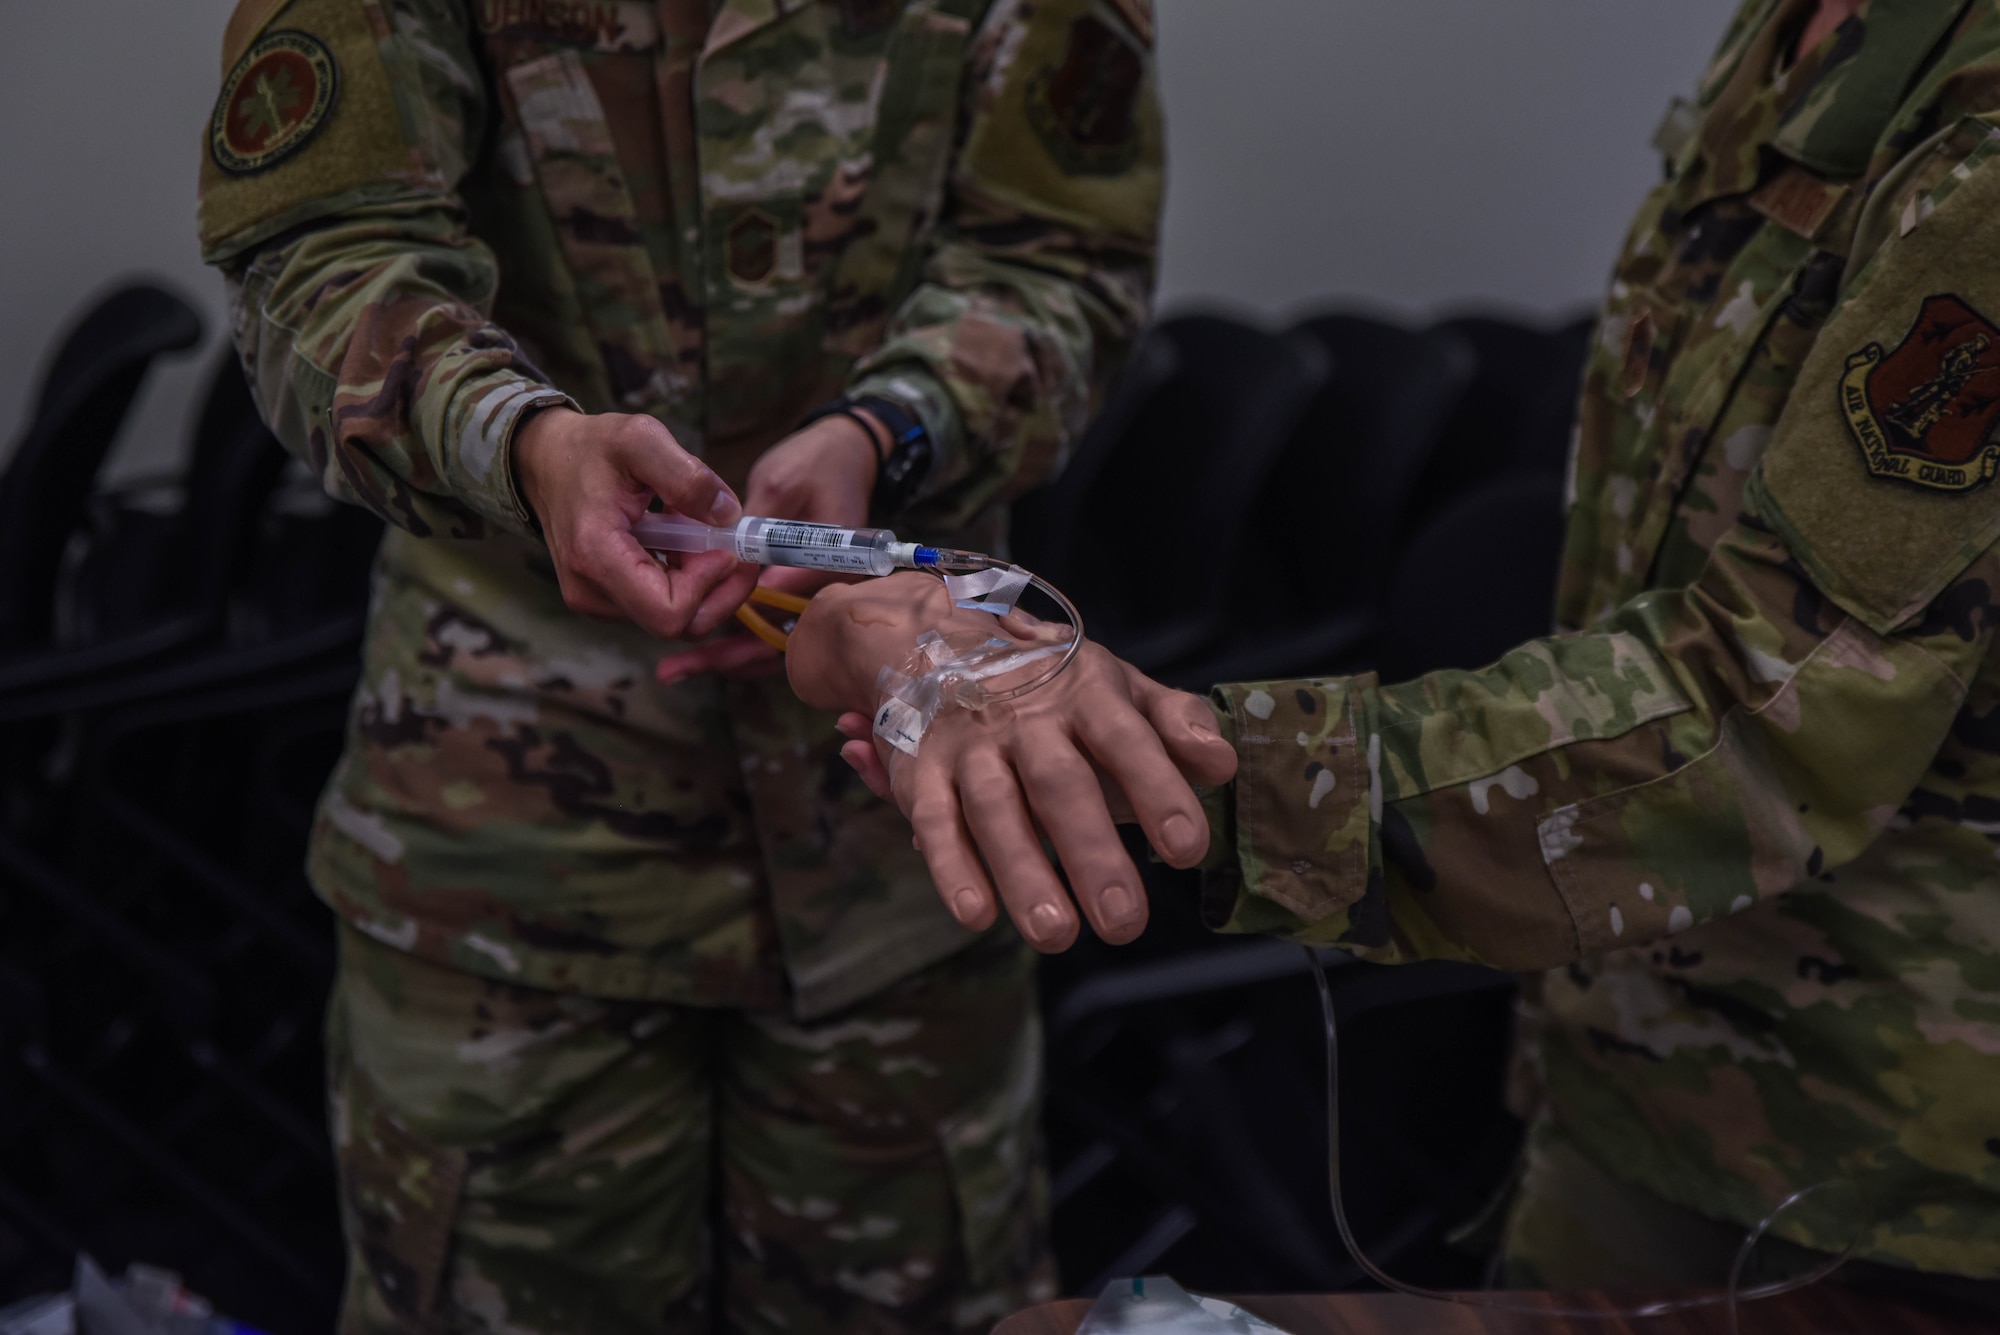 The 114th Medical Group utilized the Medic-X program as part of their Multi Capable Airman training for non-clinical medical personnel to develop relevant life sustaining skills.